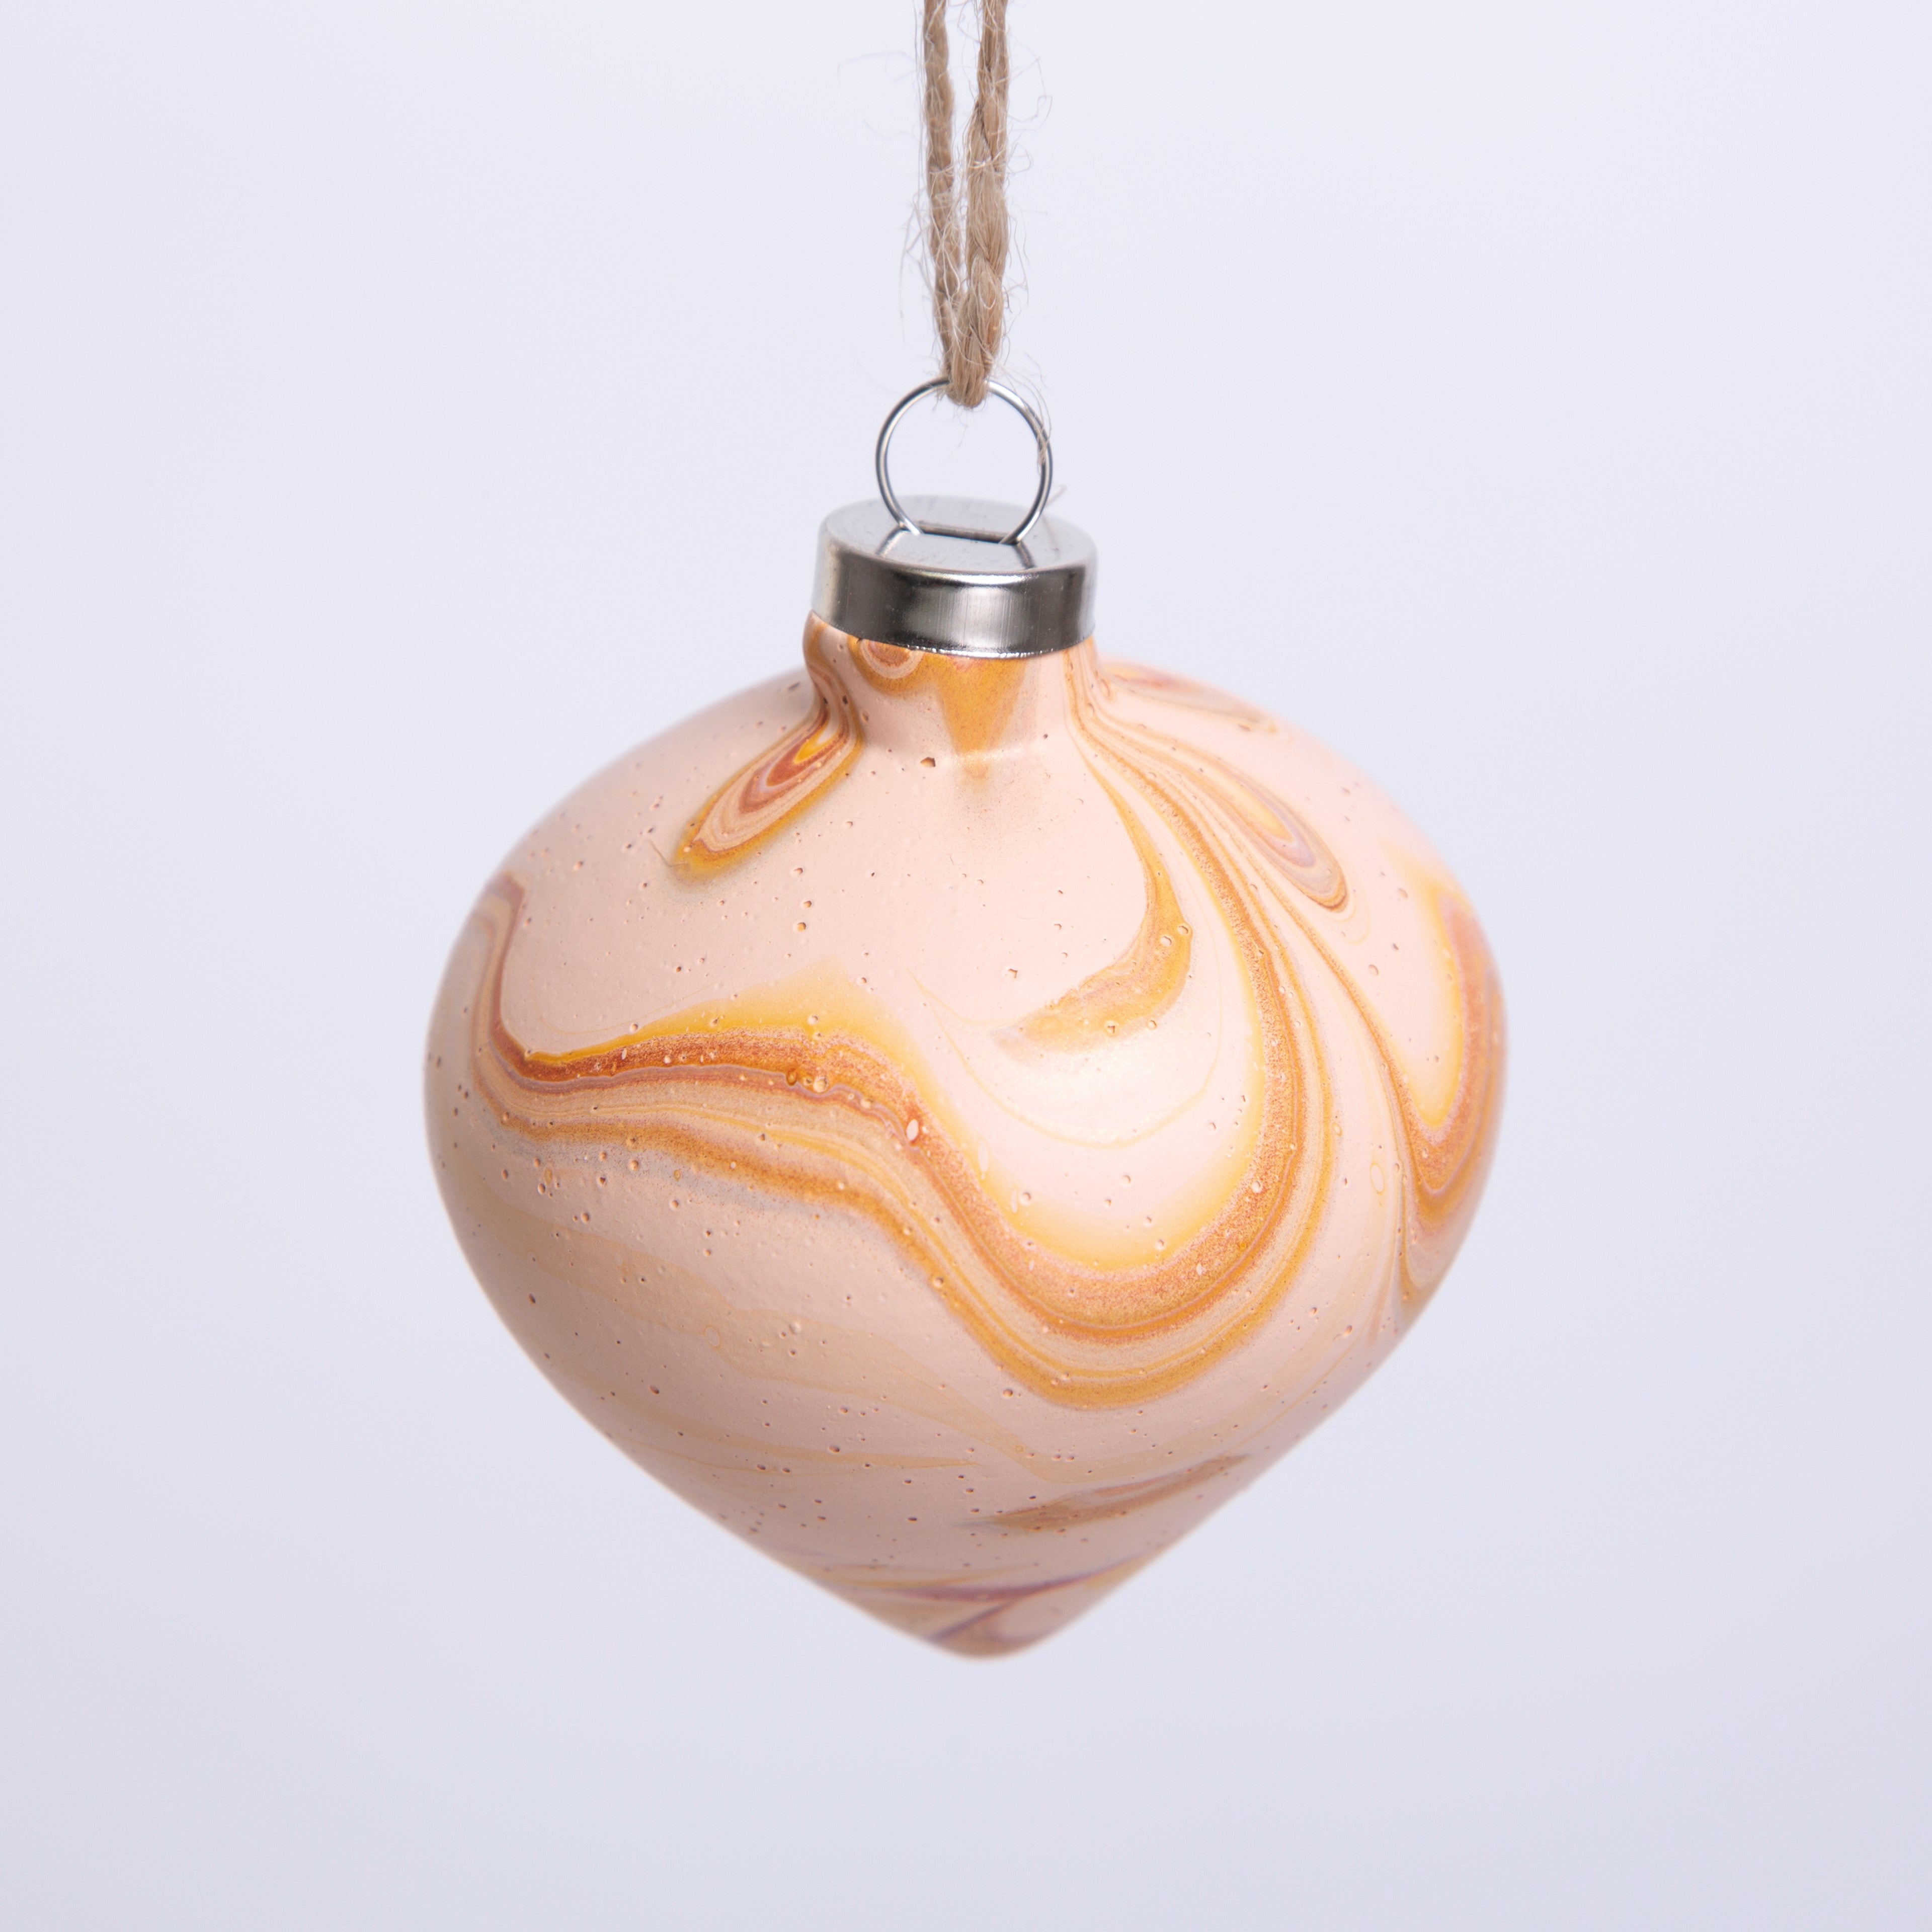 'Family' Pink & Copper Hand Painted Ceramic Bauble - Diamond Shape